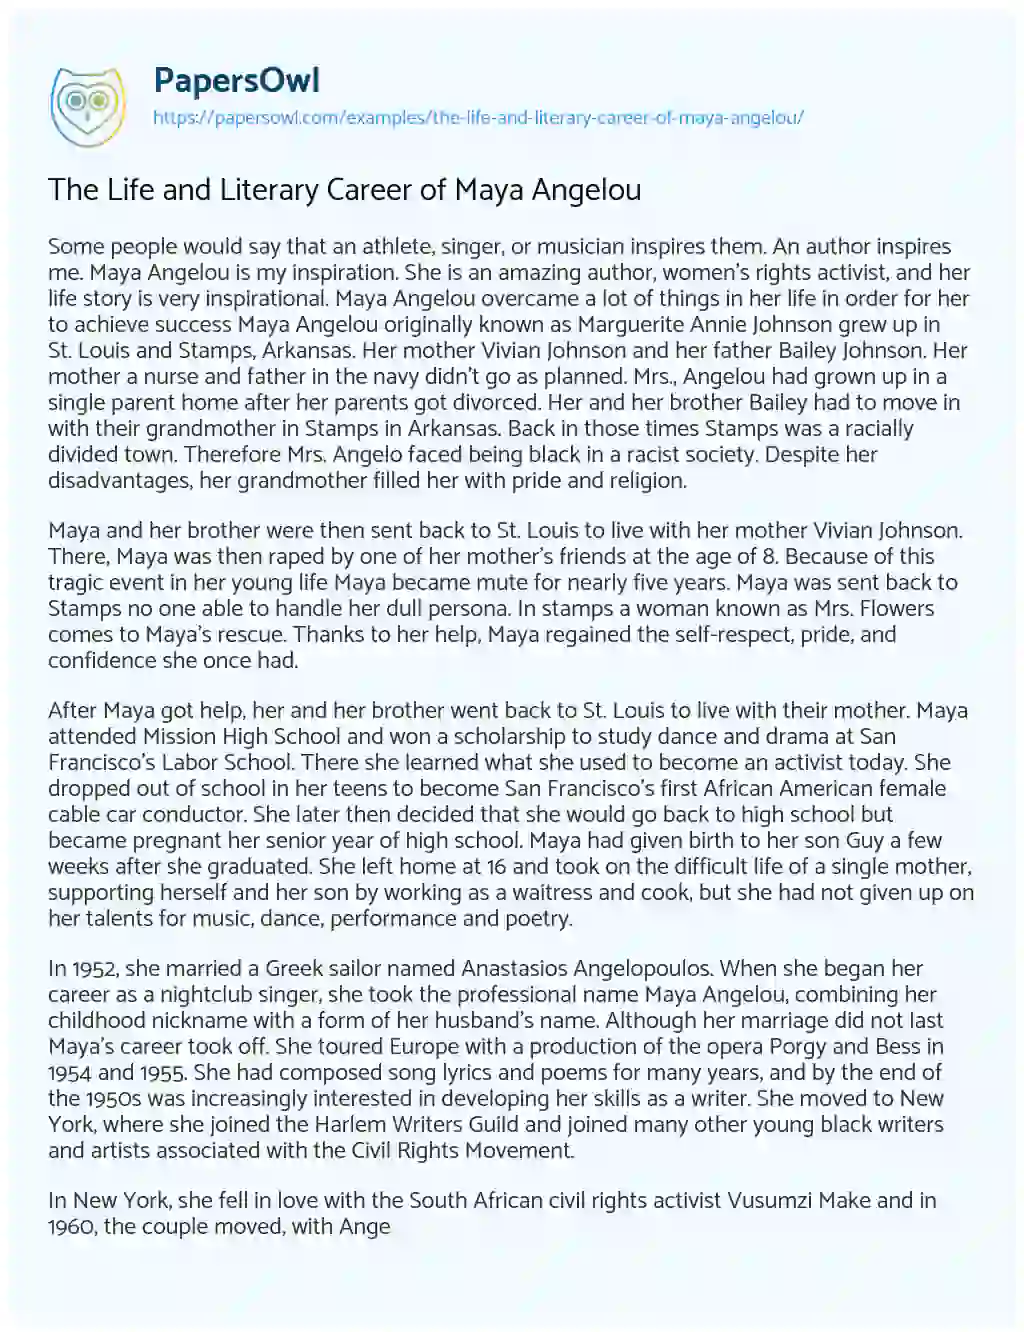 Essay on The Life and Literary Career of Maya Angelou